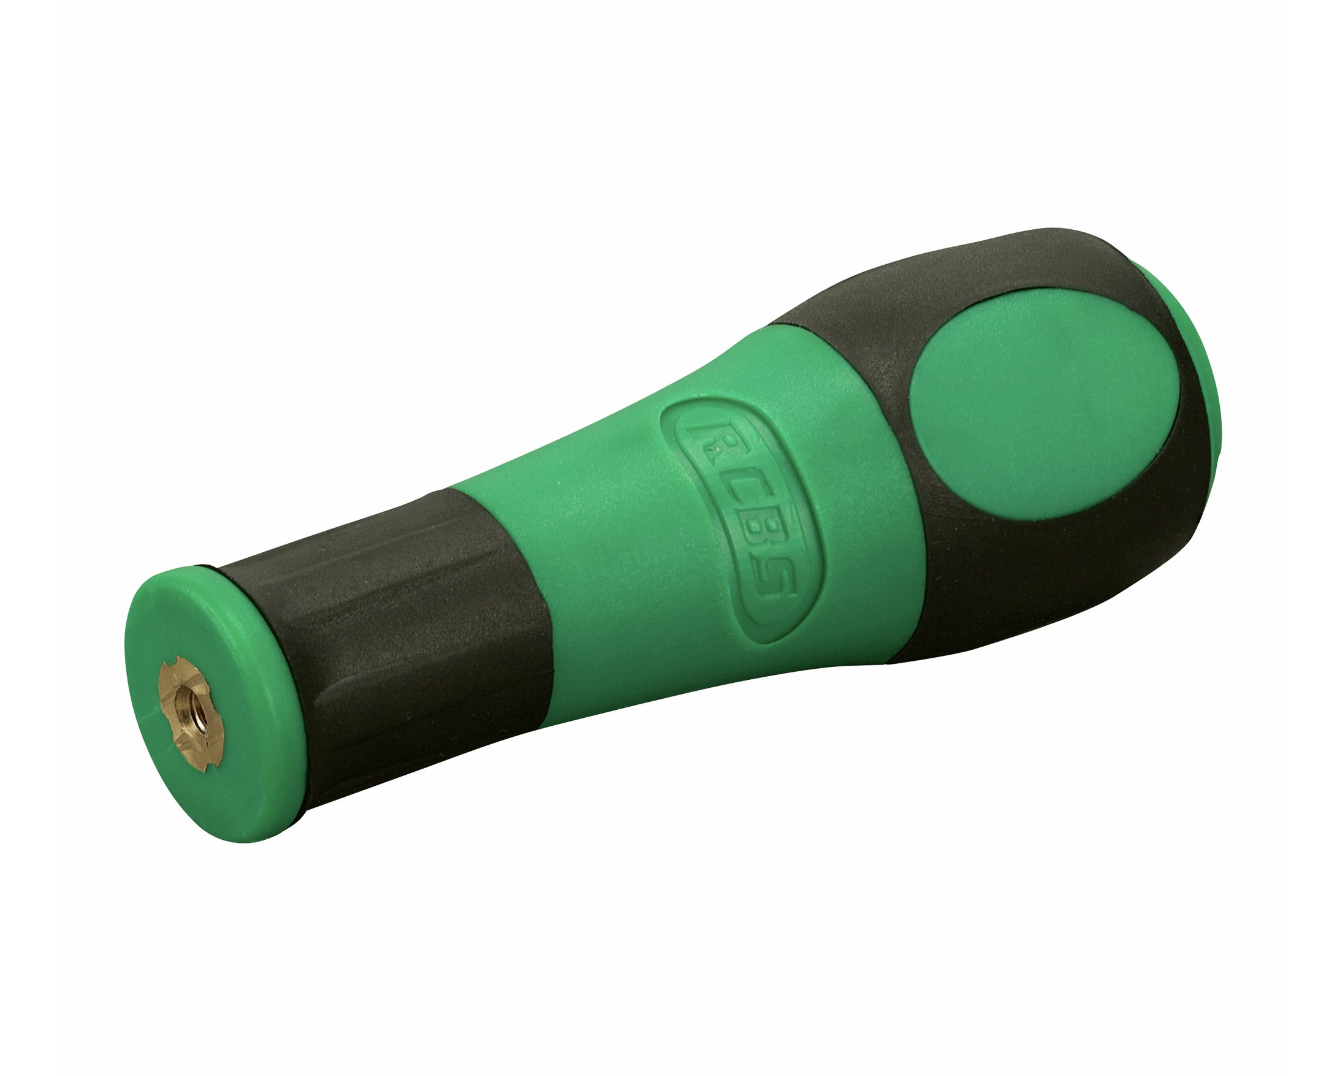 RCBS Accessory Handle 2 Green and Black 9332